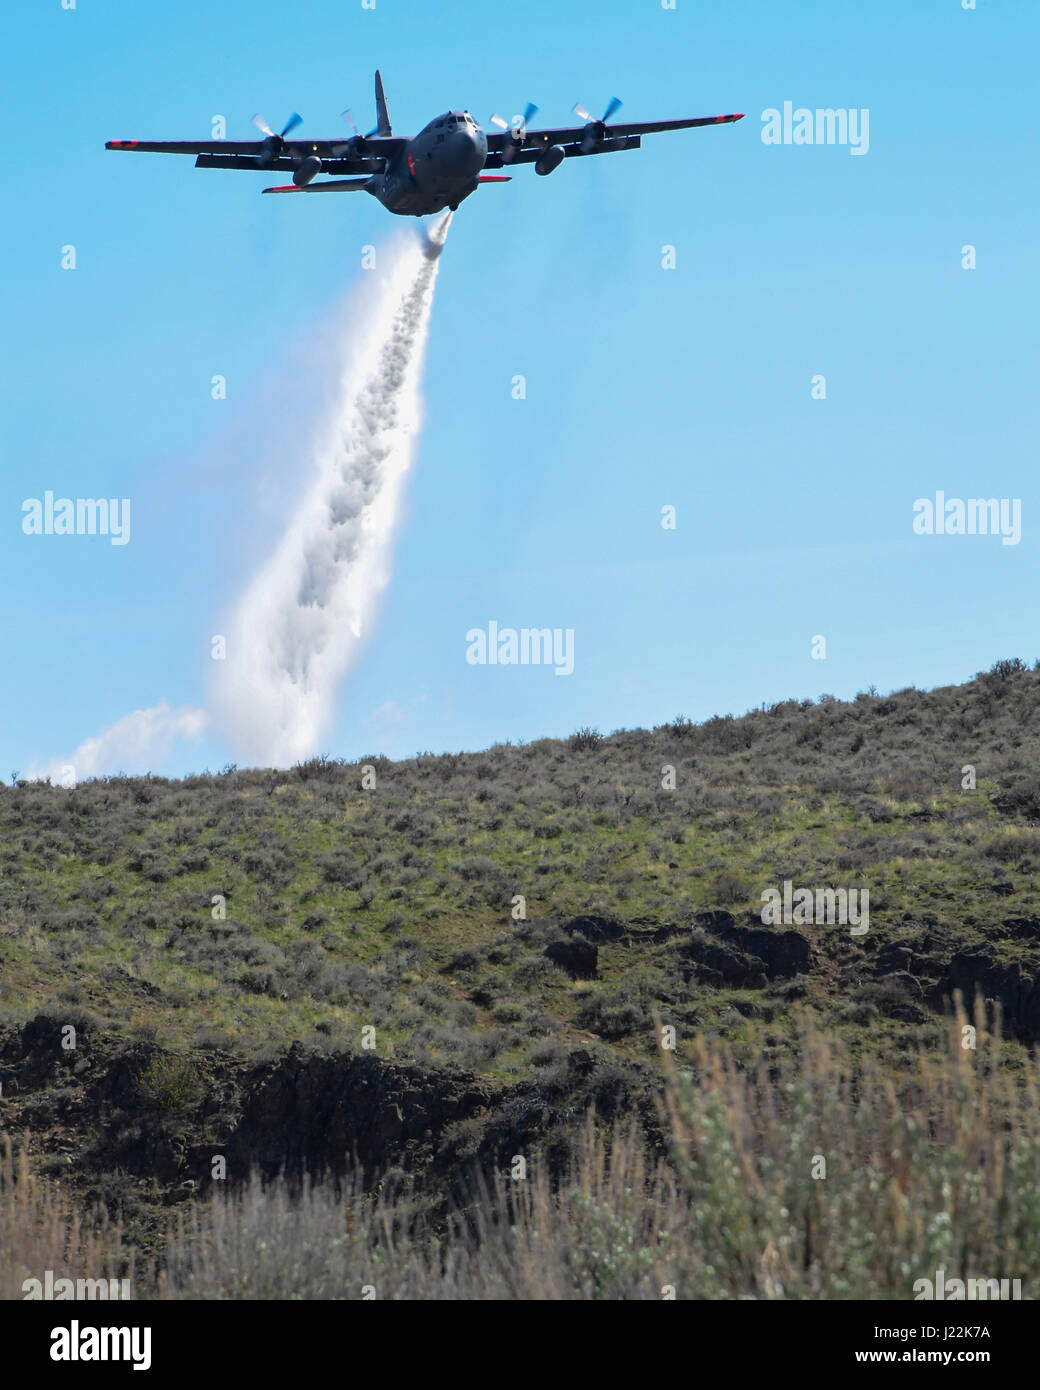 A C130h aircraft loaded with the MAFFS (Modular Airborne Fire Fighting System) from the 152rd Airlift Wing of Reno, Nevada drops a water line while training to contain wildfires just outside Bosie, Idaho. April 21, 2017. More than 400 personnel of four C-130 Guard and Reserve units — from California, Colorado, Nevada and Wyoming, making up the Air Expeditionary Group — are in Boise, Idaho for the week-long wildfire training and certification sponsored by the U.S. (U.S. Air National Guard photo by Staff Sgt. Nieko Carzis) Stock Photo